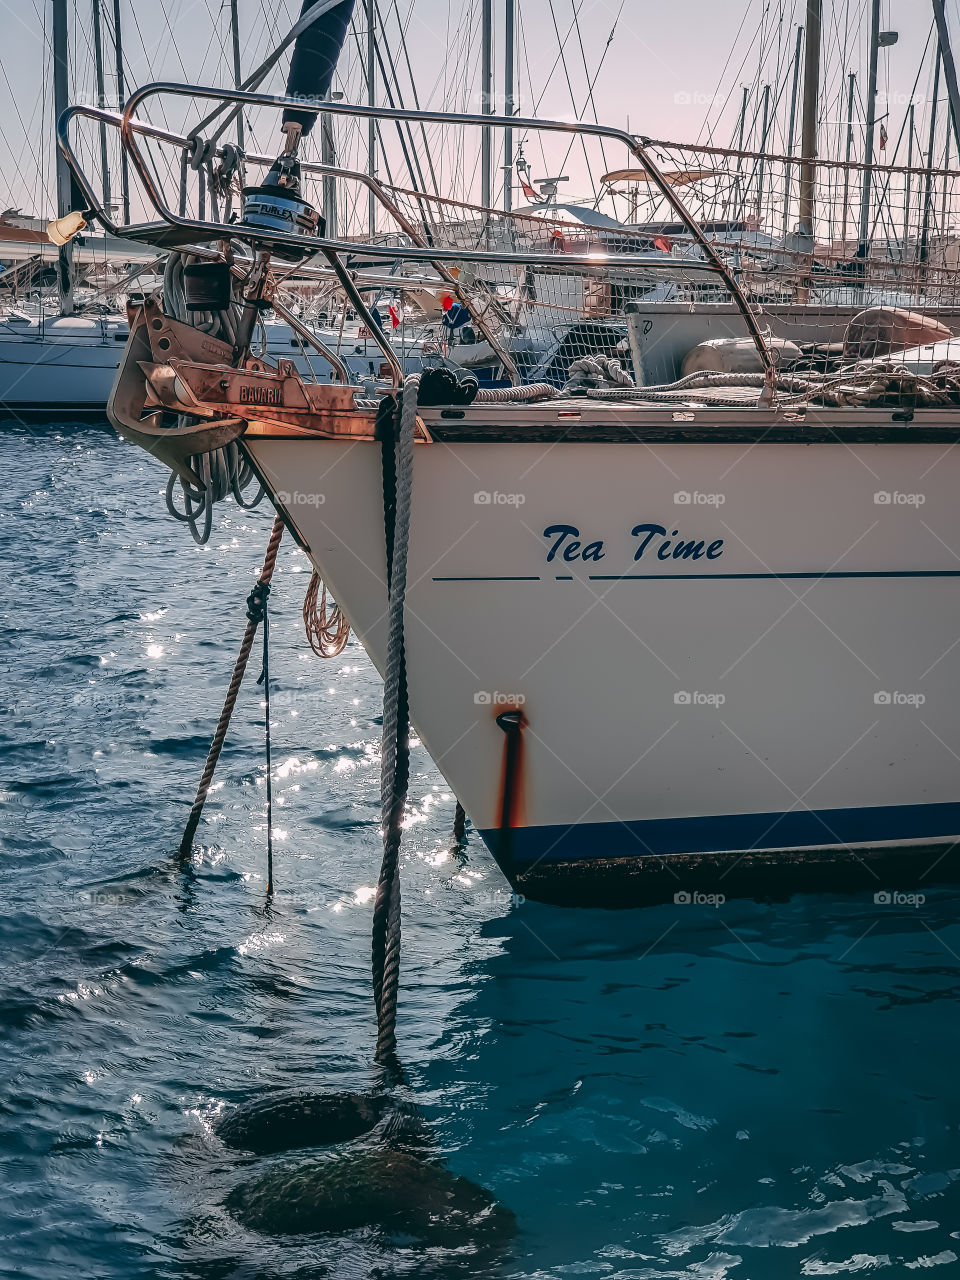 Some boat names in Maltese marinas have names straight from the mind of the English man.